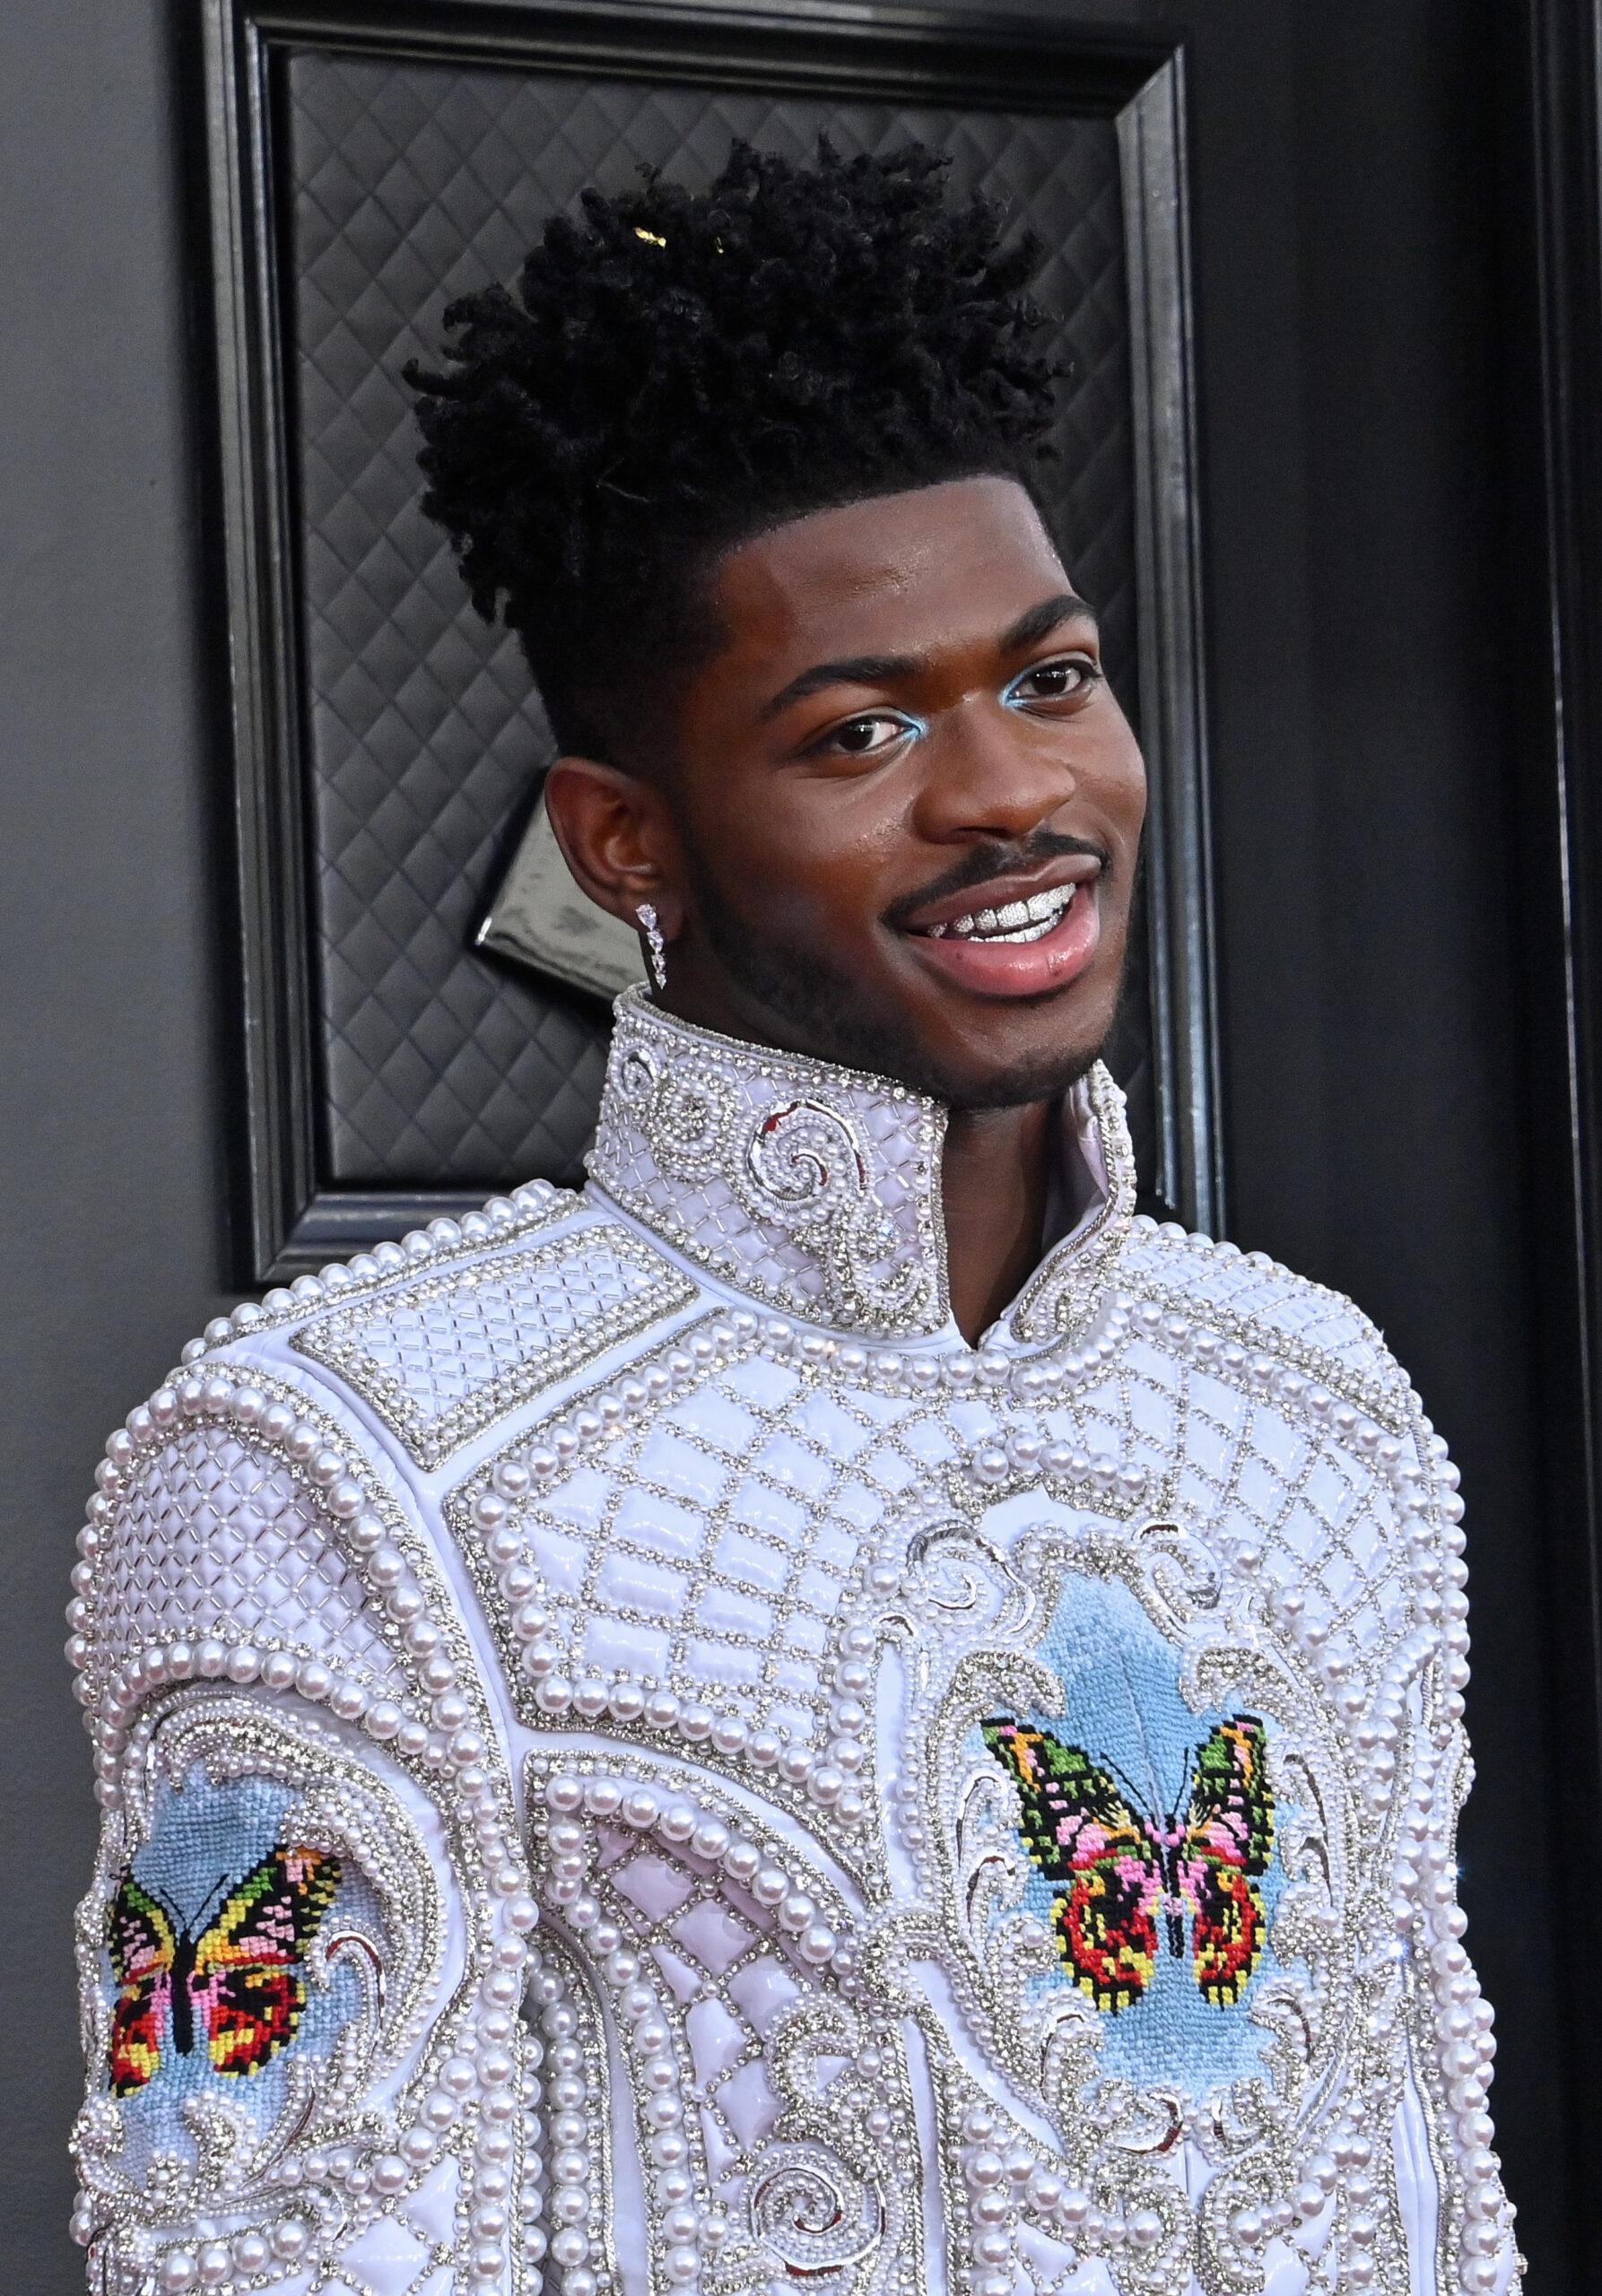 Lil Nas X at the 64th Grammy Awards in Las Vegas